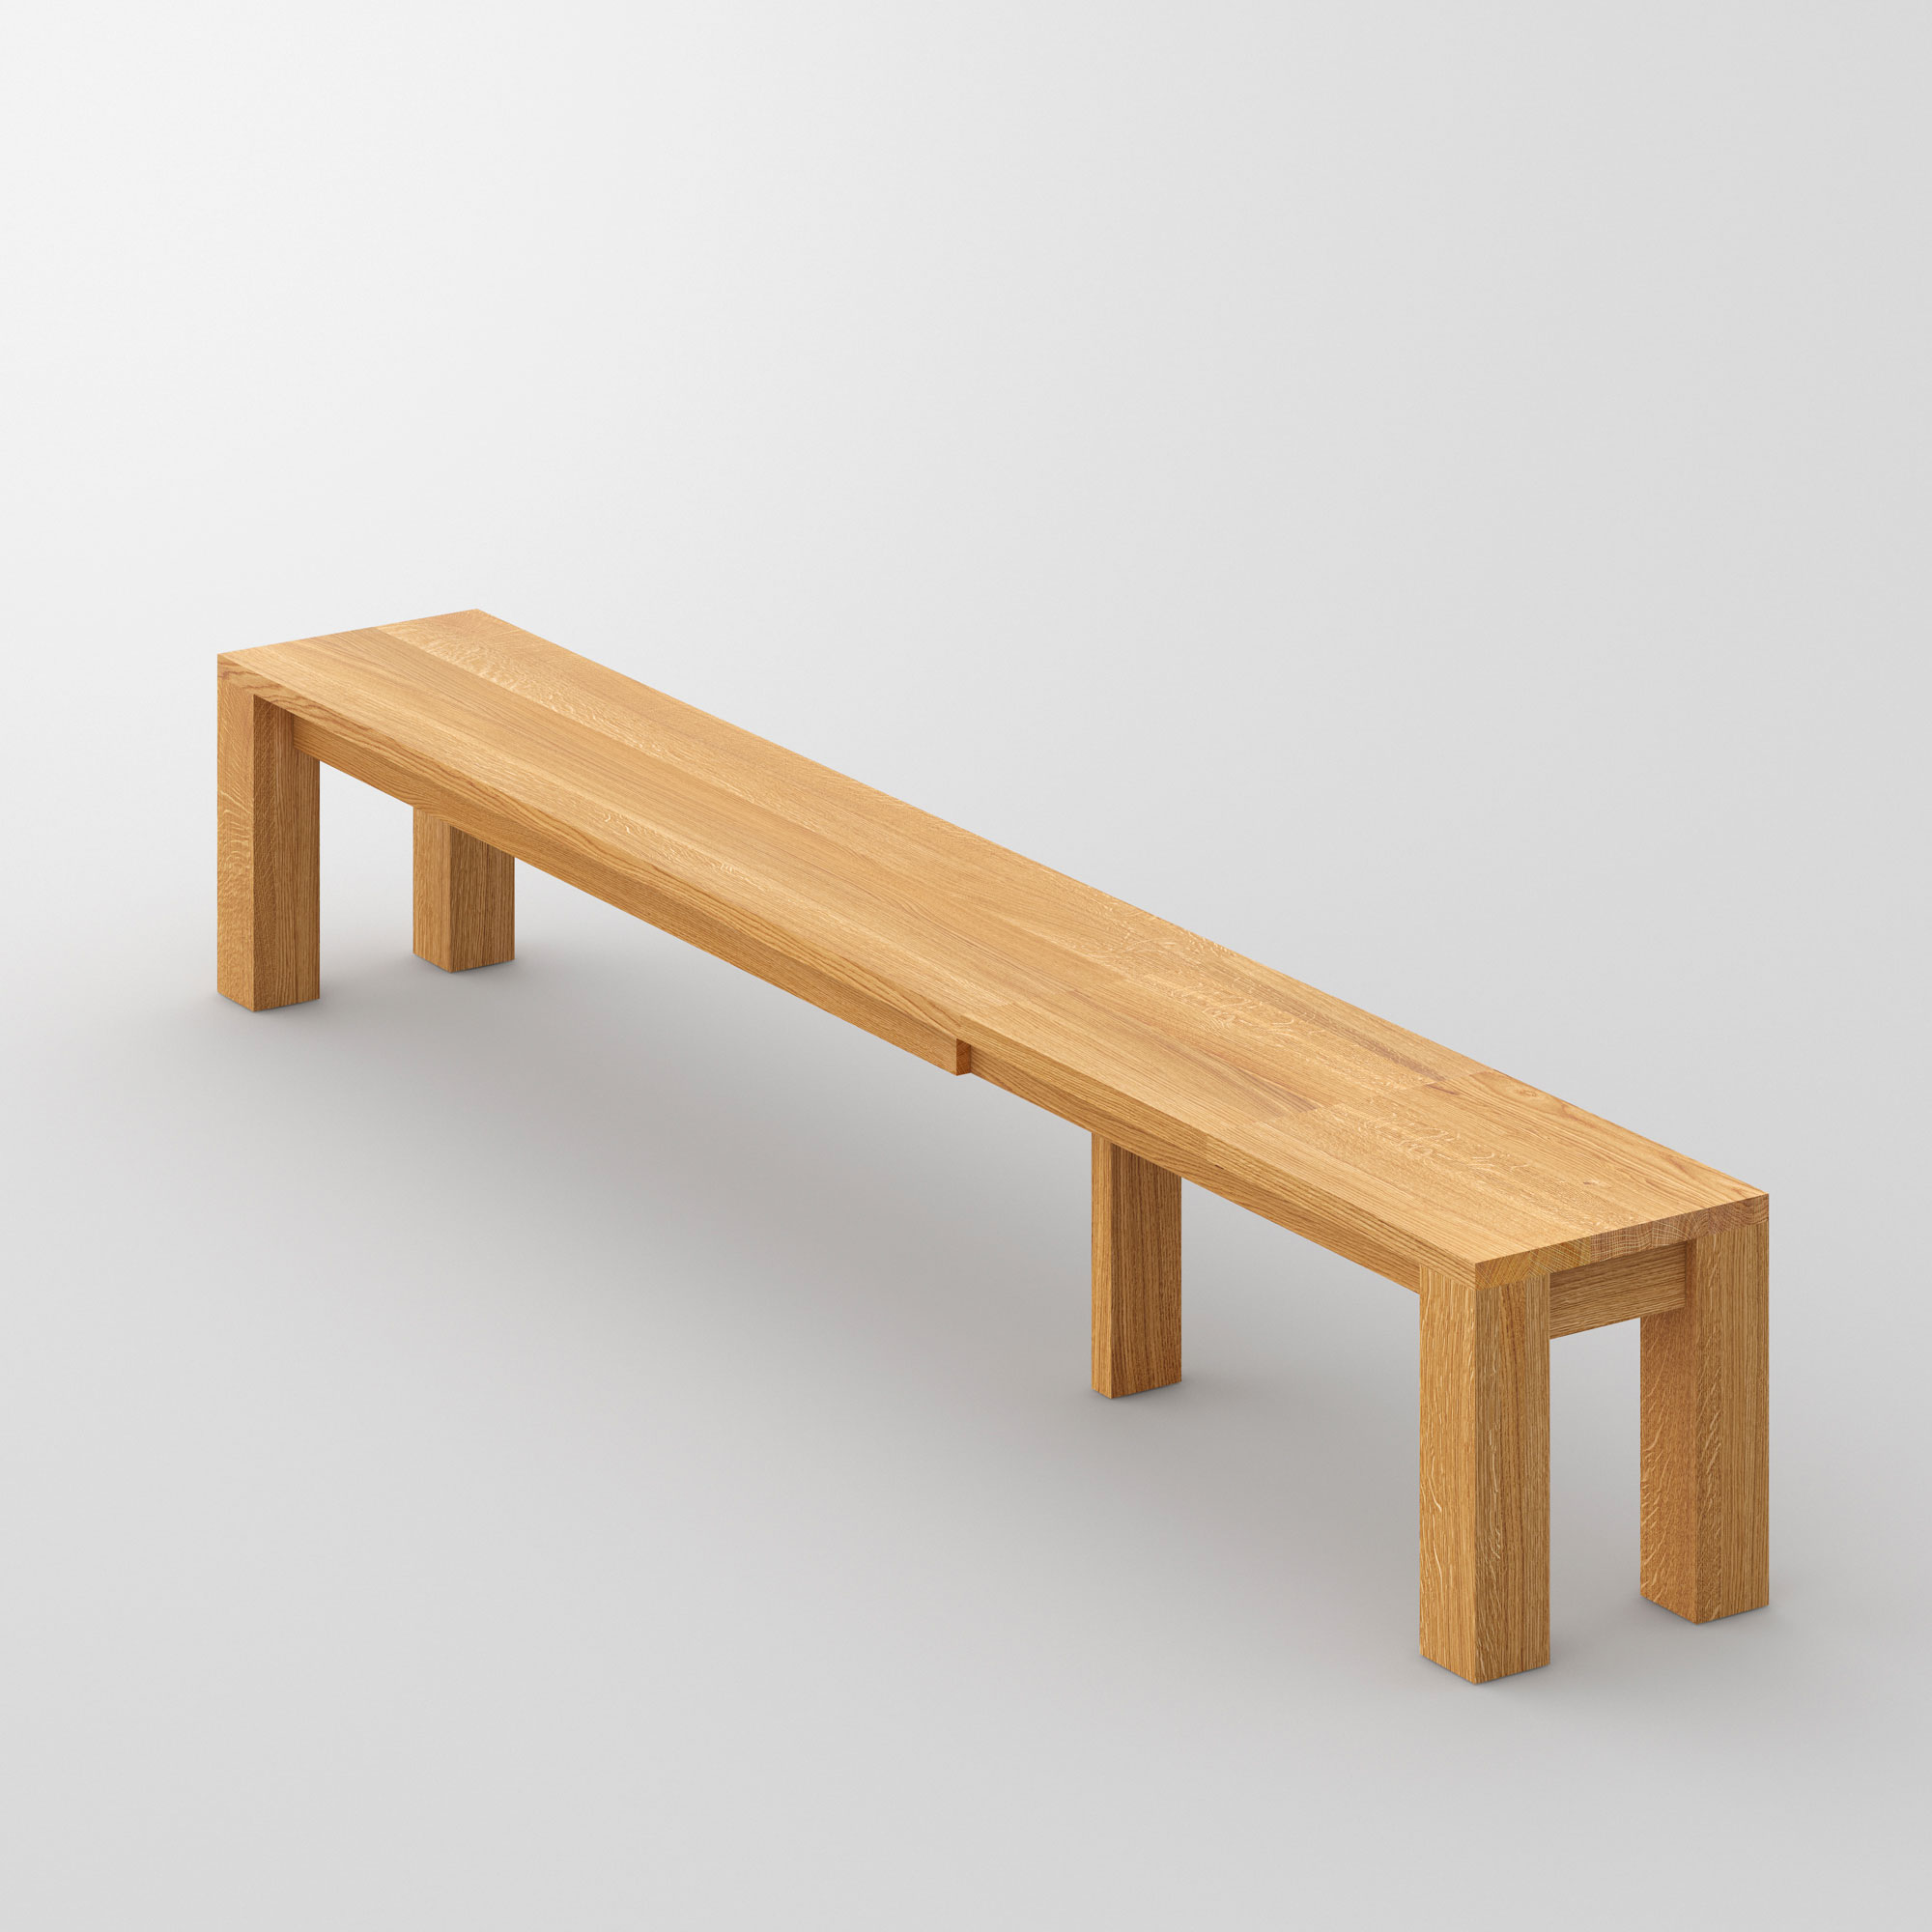 Extendable Bench CUBUS EP 3 cam3 custom made in solid wood by vitamin design